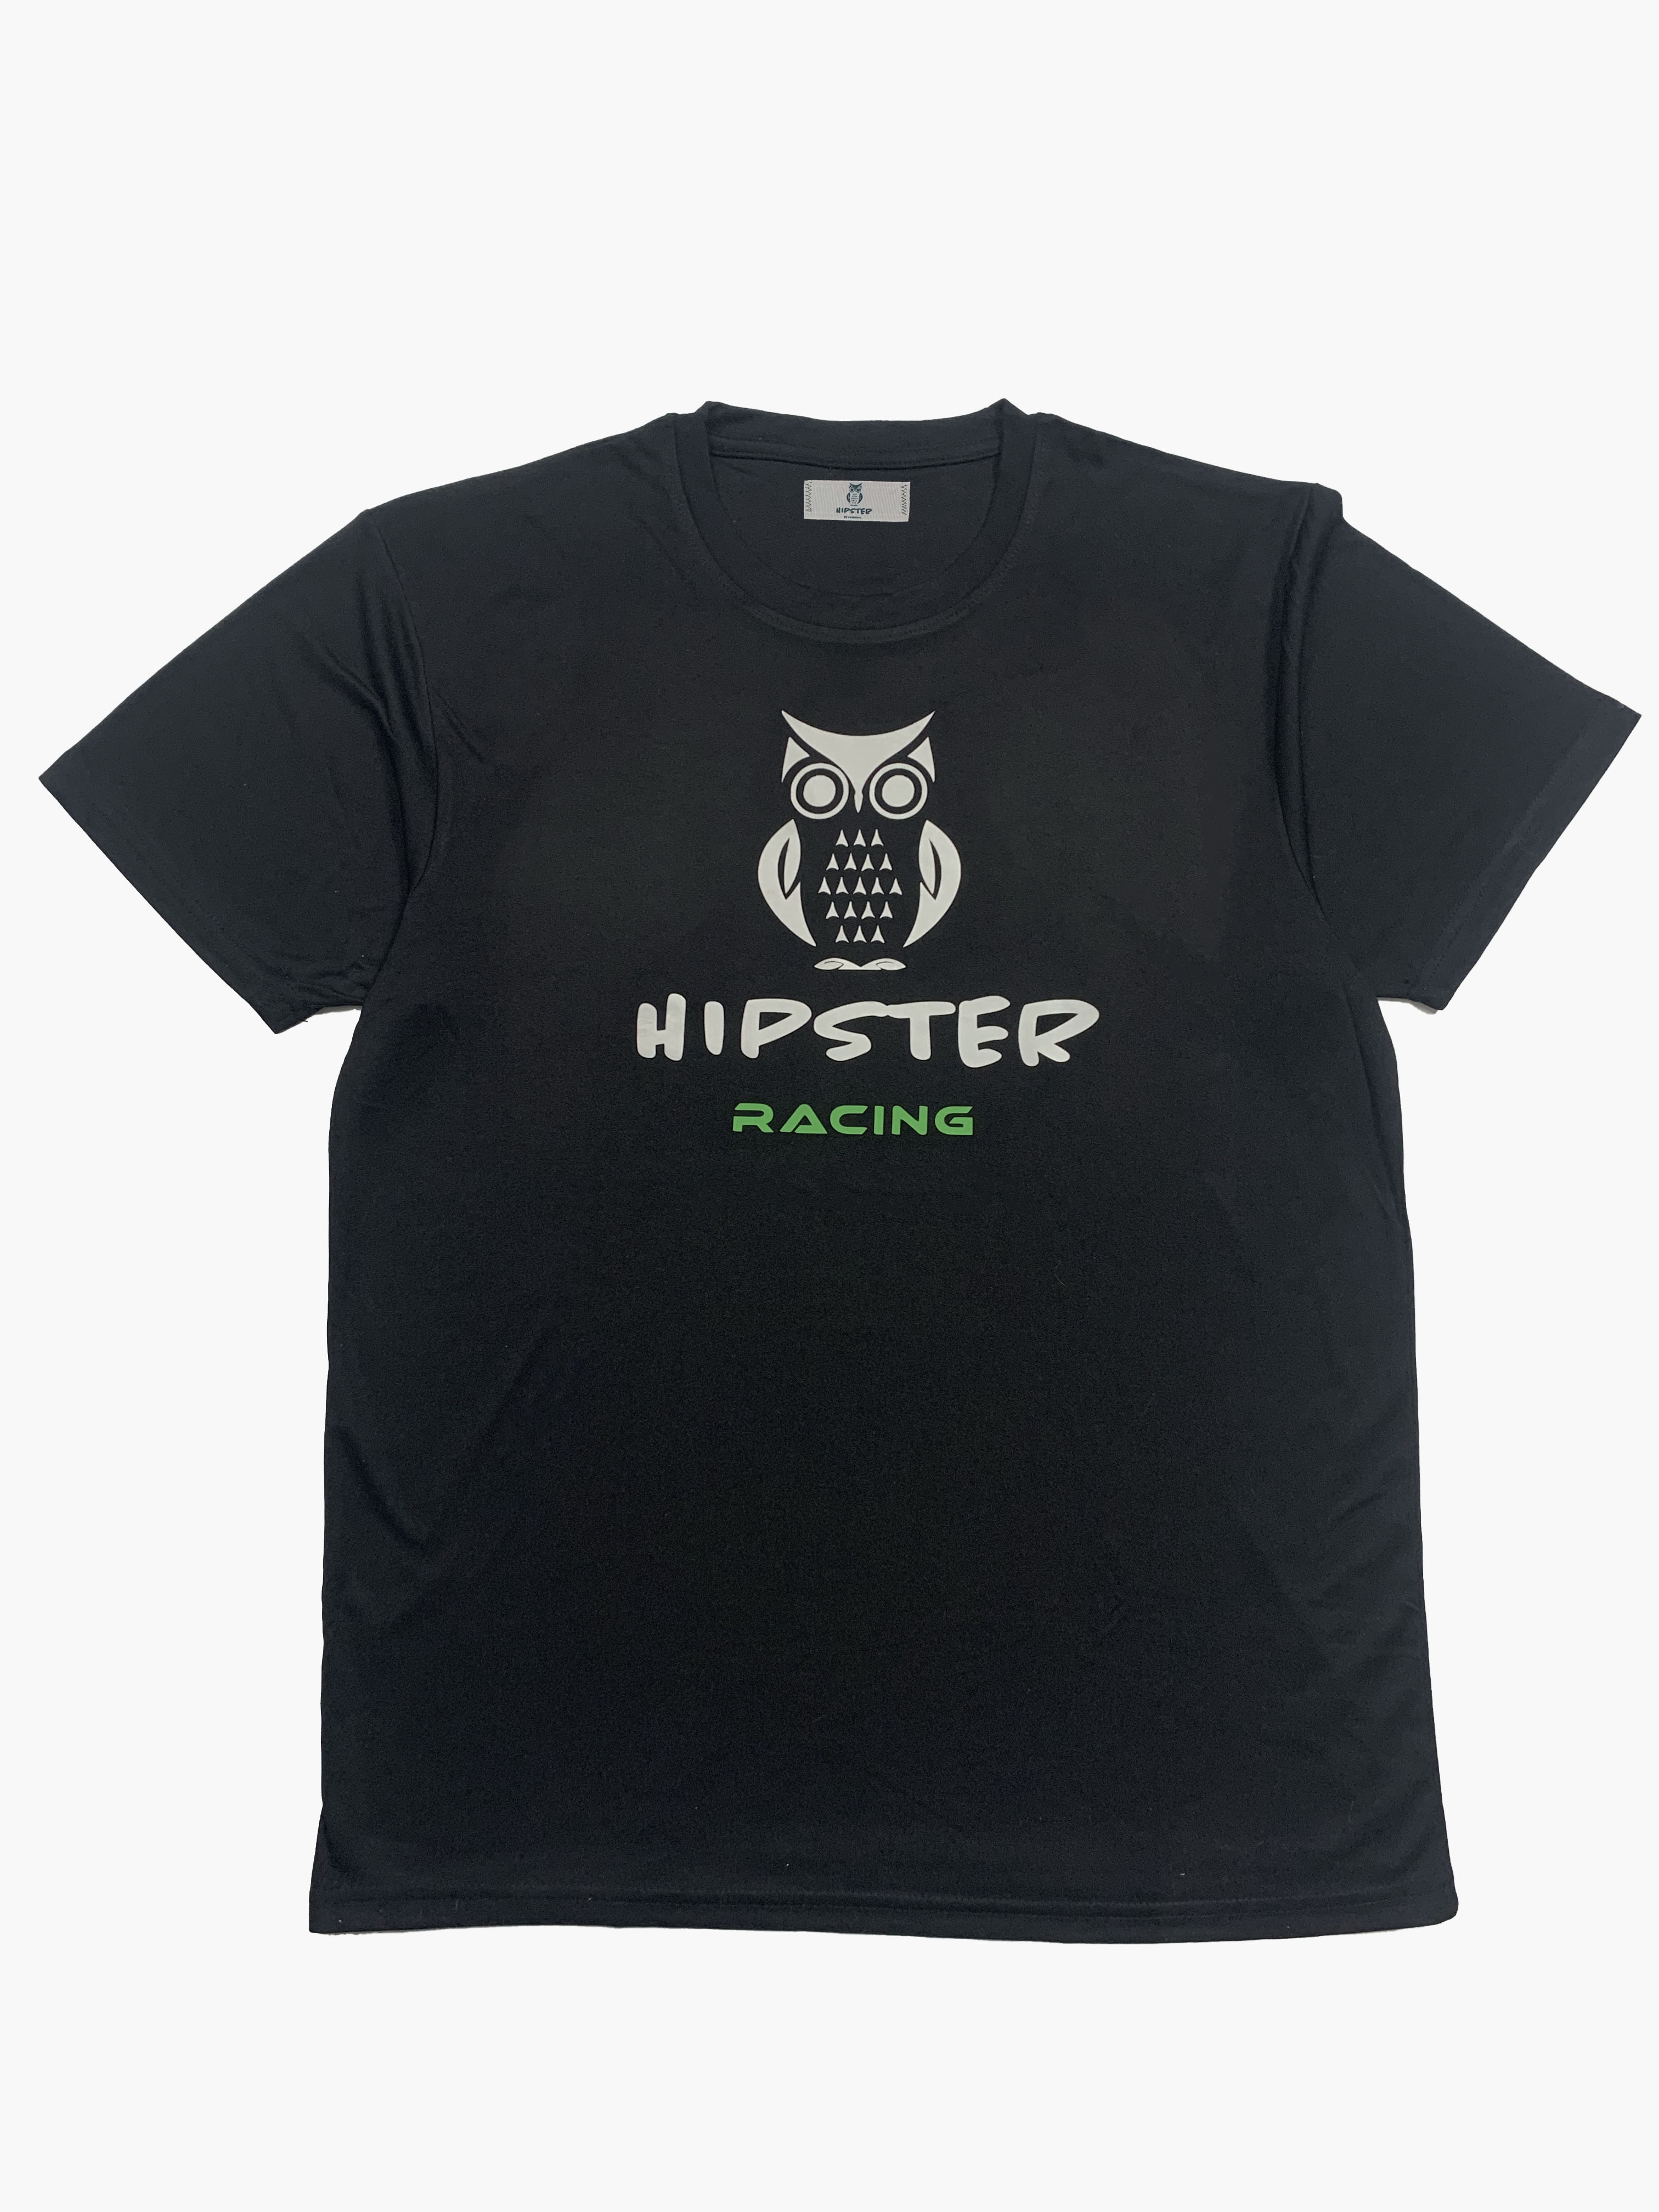 Hipster Racing Dry-Fit Performance T-Shirt